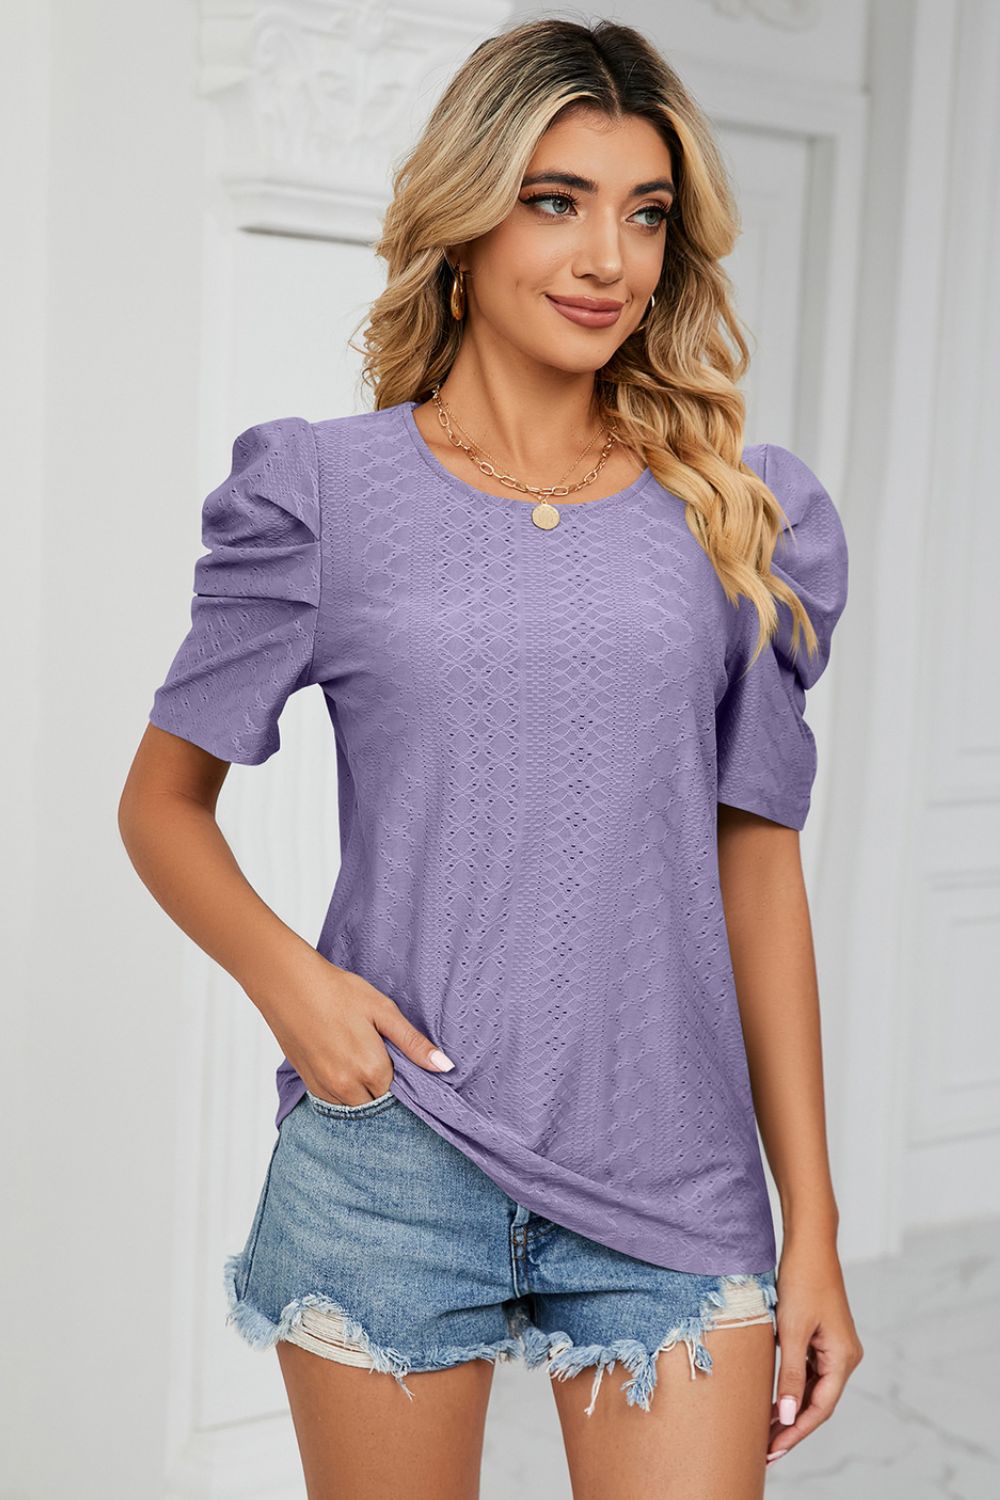 Why Not Me Eyelet Puff Sleeve Top - purple short sleeve top with puff sleeves and round neck #Firefly Lane Boutique1